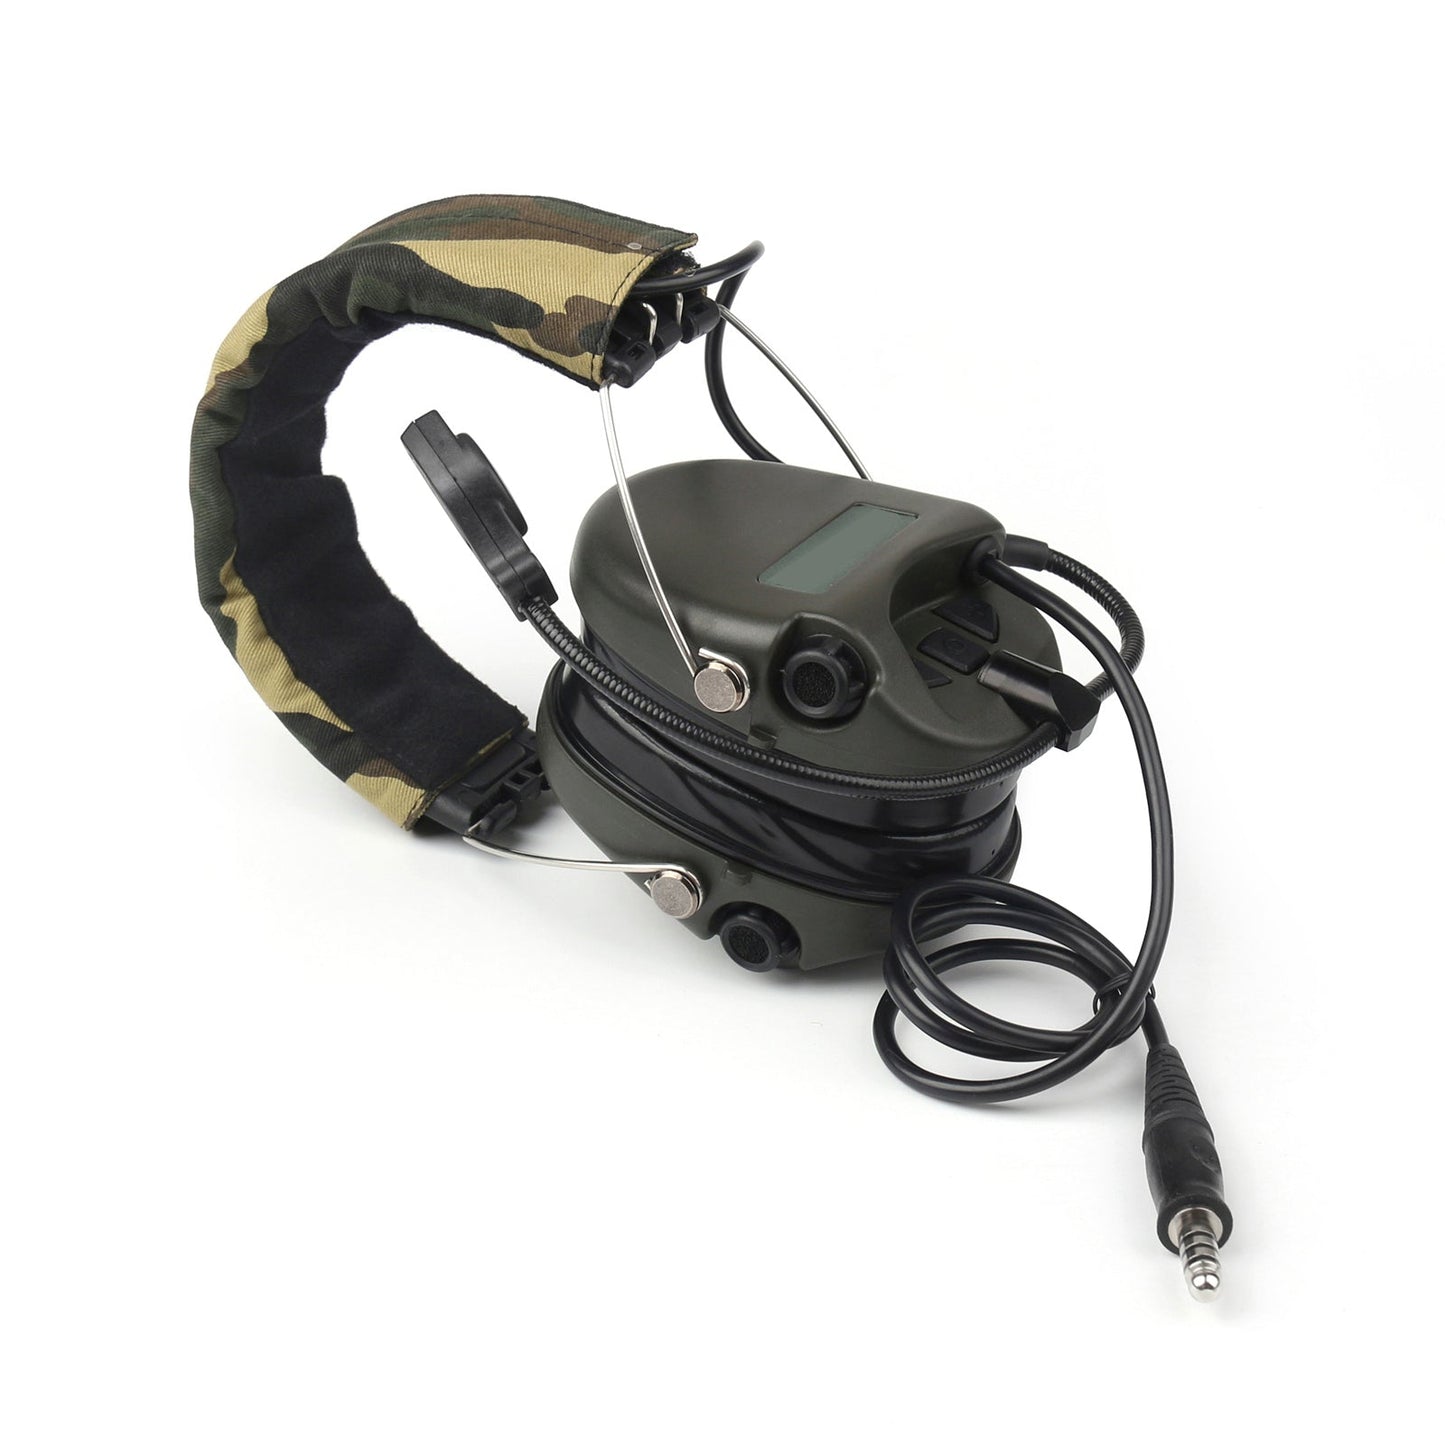 H60 Sound Pickup Noise Reduction CS Headset For XPR3300/3500 XIRP6600/P6620